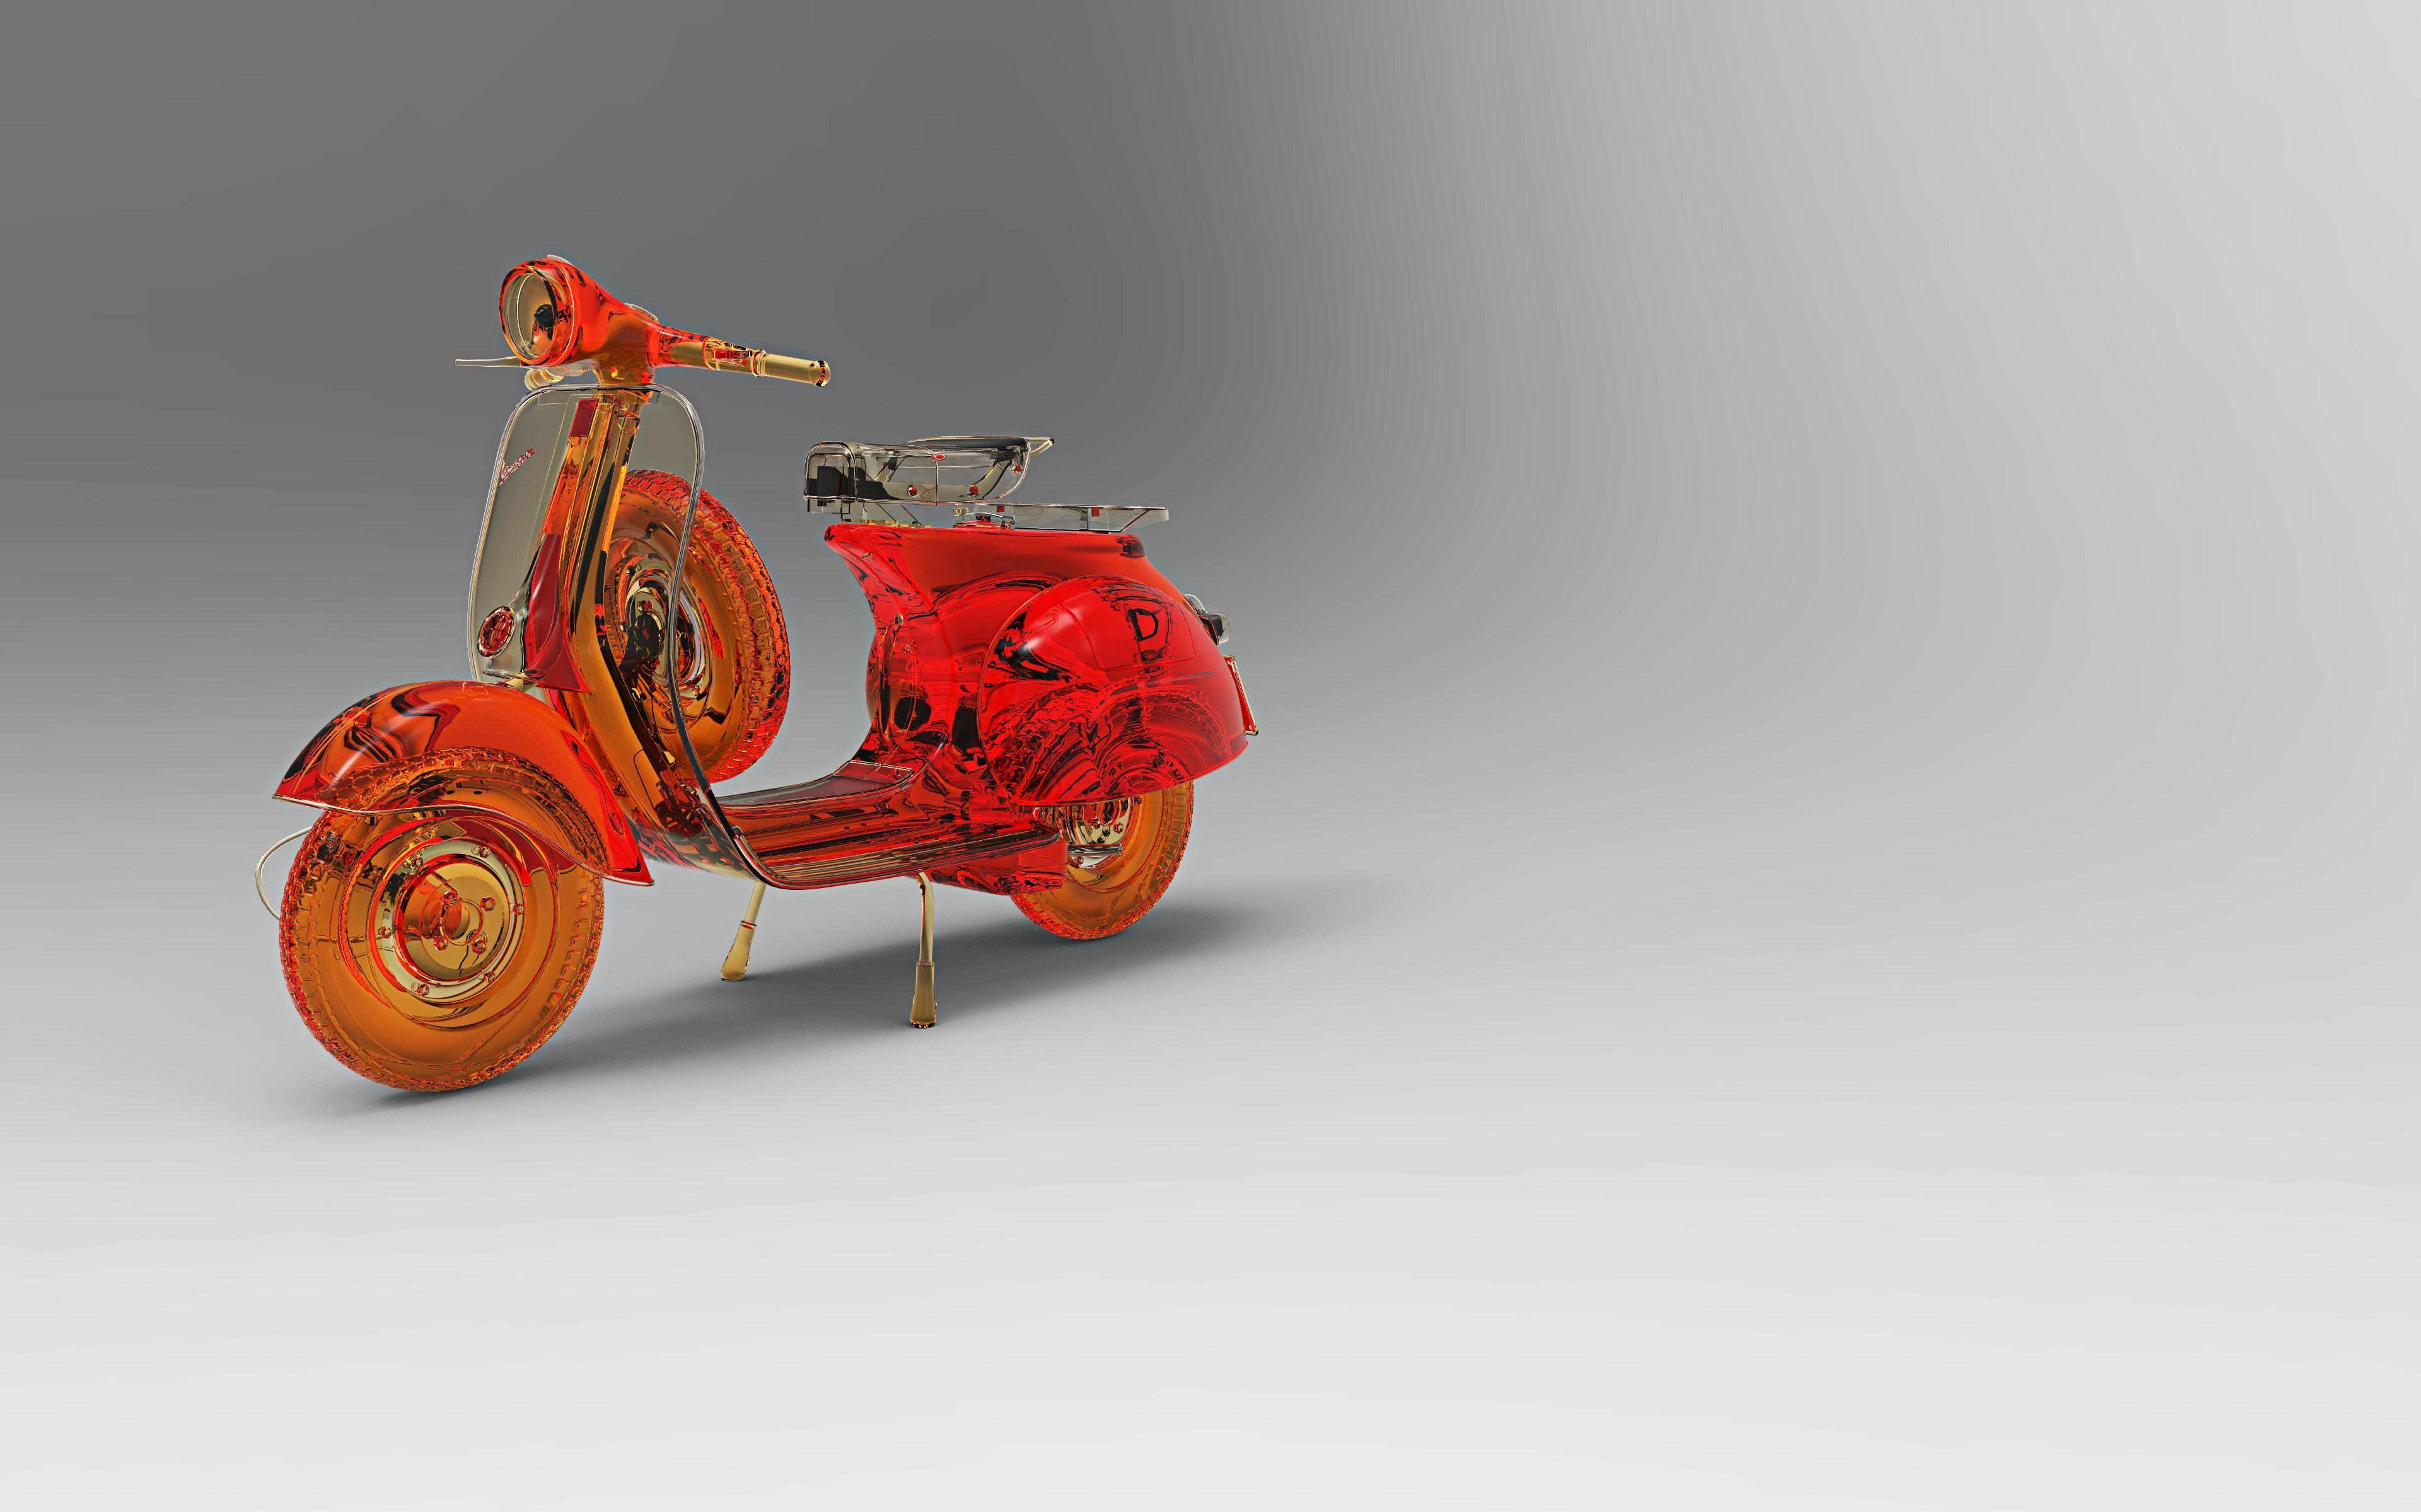 Vespa Scooter Abstract Art 4k Vespa Scooter Abstract Art 4k is an HD desktop wallpaper posted in our free image col. Abstract wallpaper, Art wallpaper, Abstract